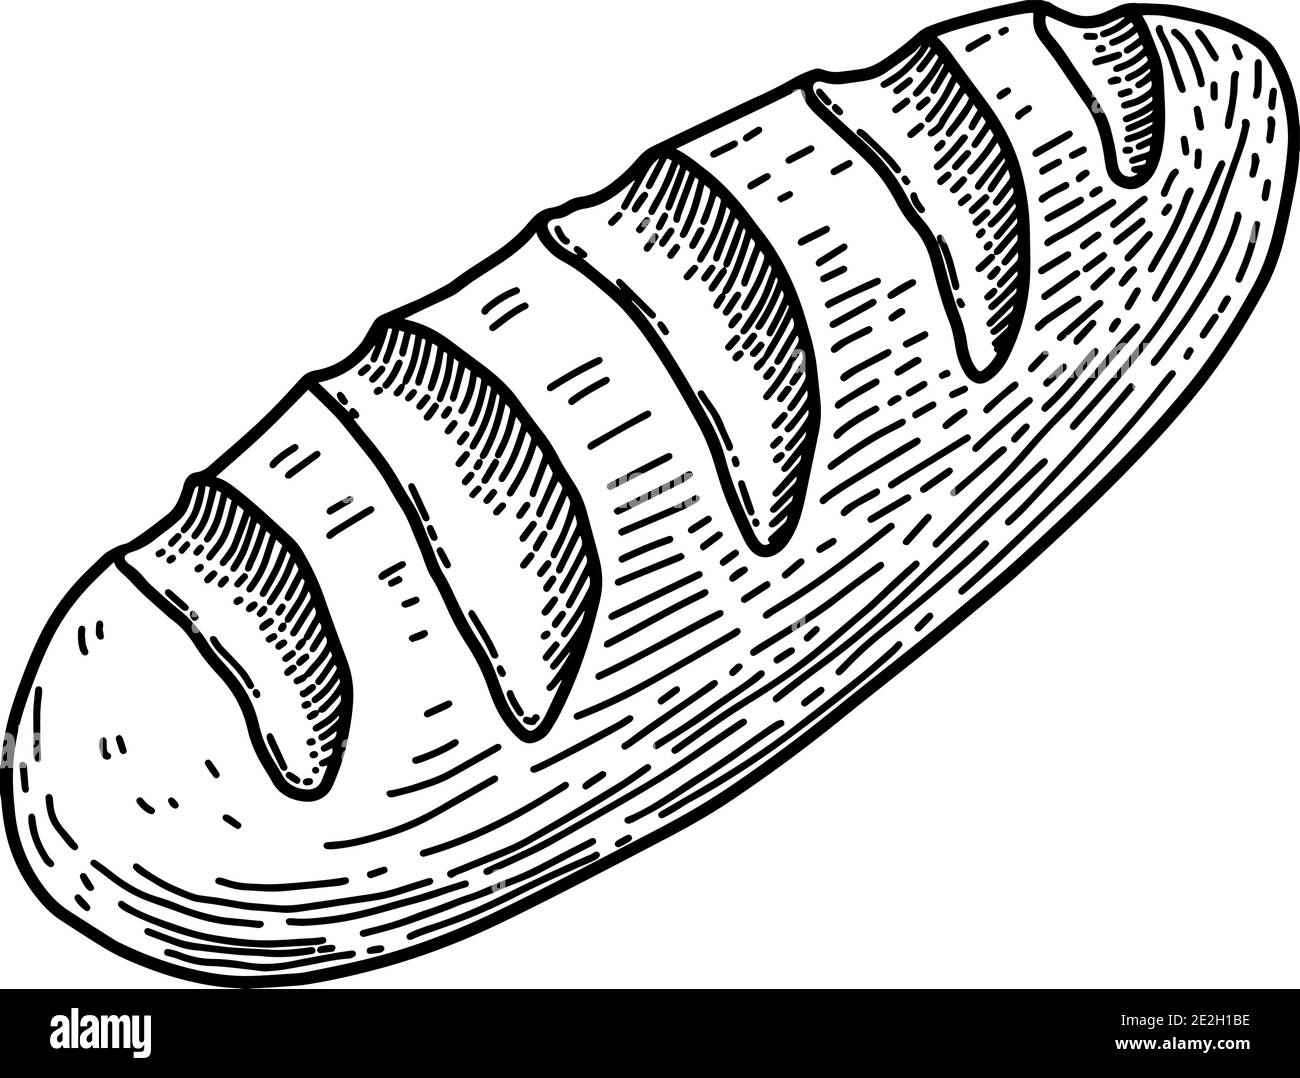 Illustration of bread in engraving style. Design element for poster ...